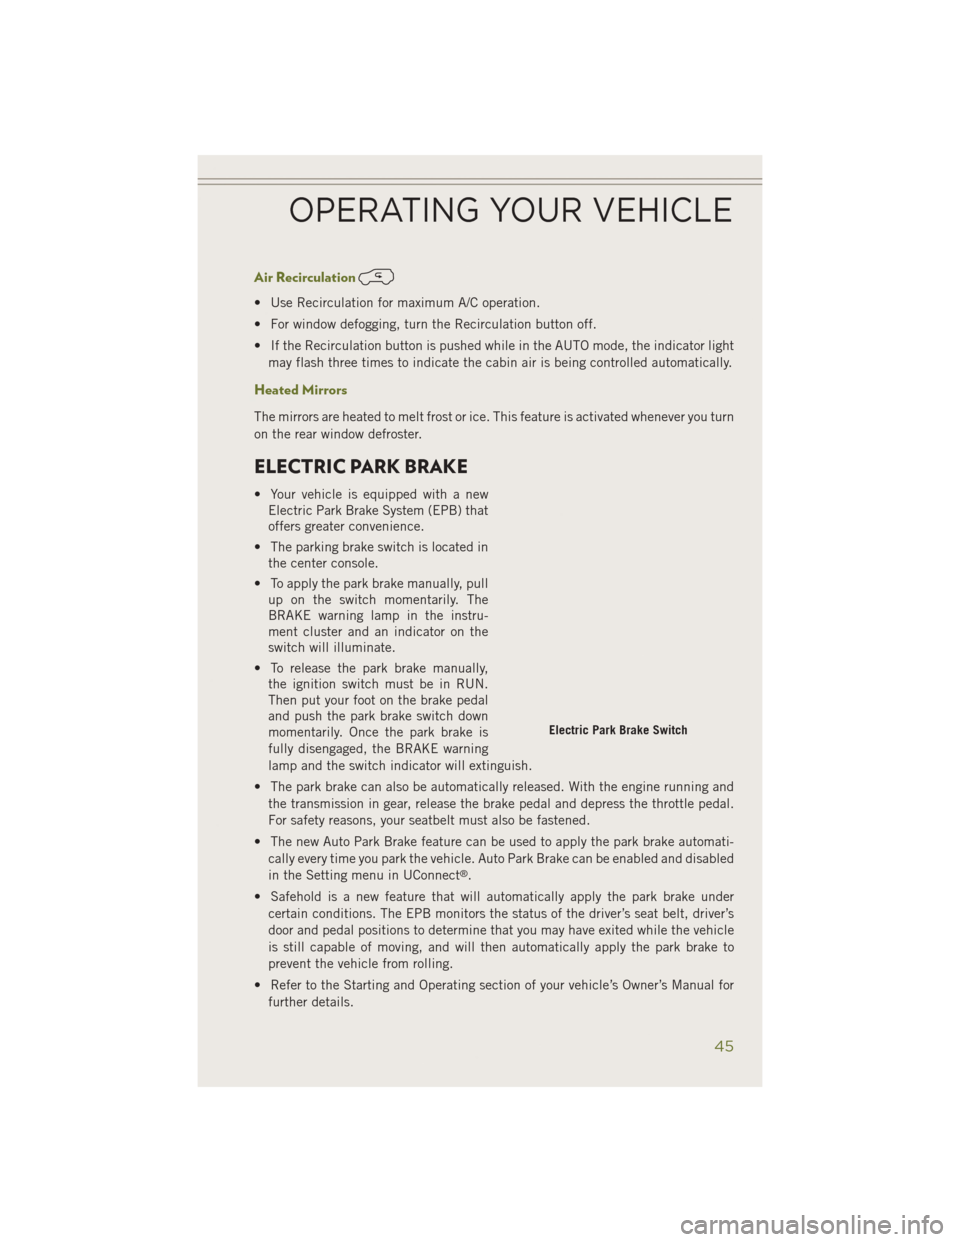 JEEP CHEROKEE 2014 KL / 5.G Service Manual Air Recirculation
• Use Recirculation for maximum A/C operation.
• For window defogging, turn the Recirculation button off.
• If the Recirculation button is pushed while in the AUTO mode, the in